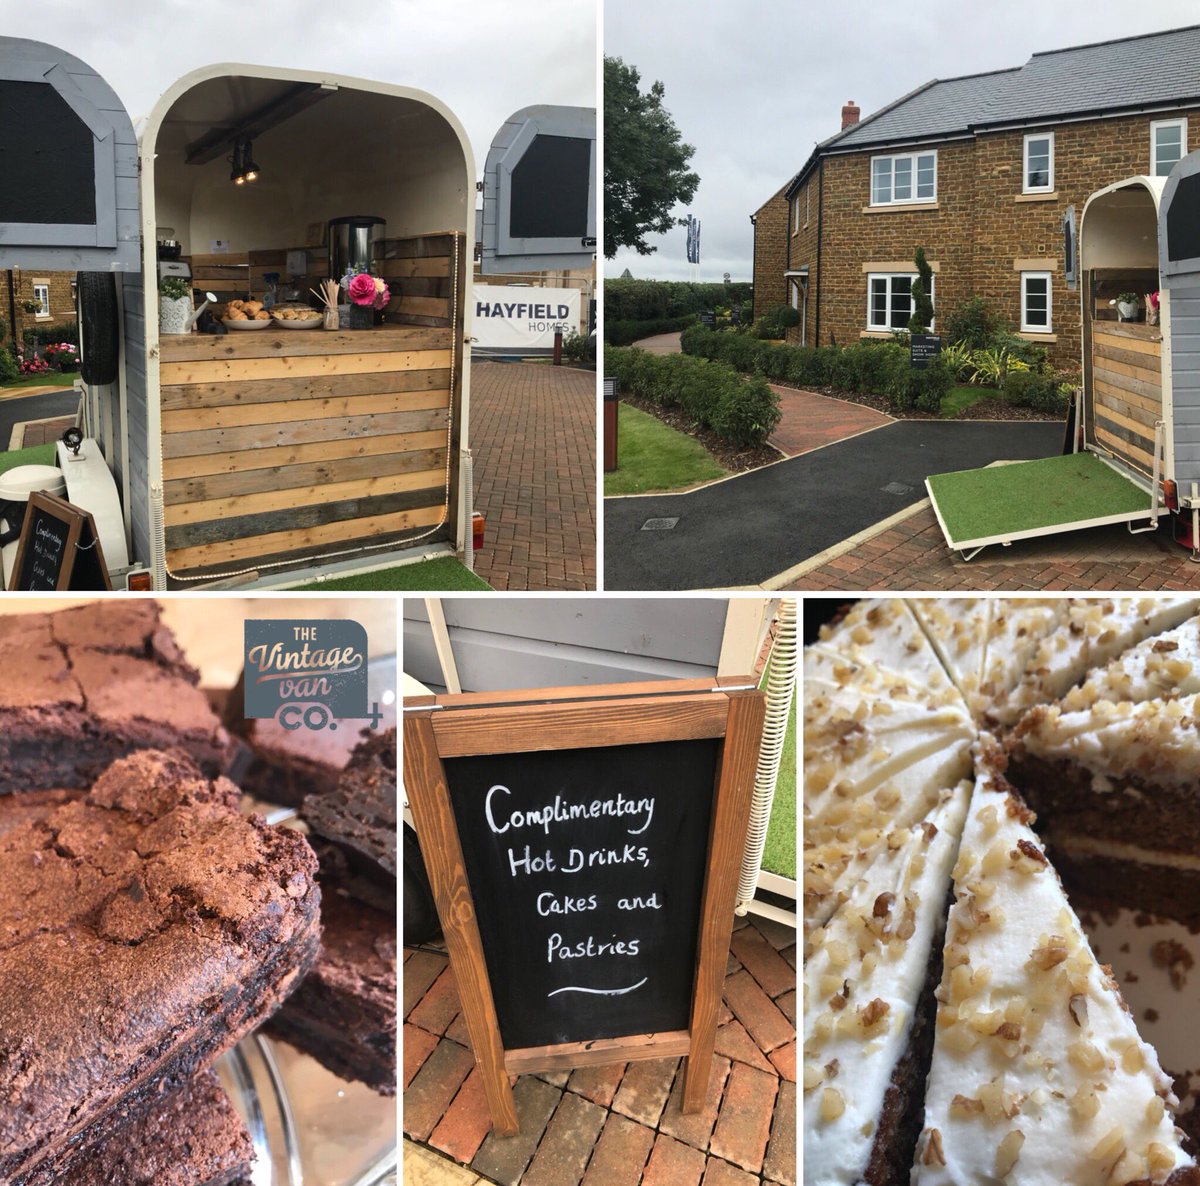 A corporate event yesterday for @hayfieldhomes and @connellsestateagents serving hot drinks and cakes for potential buyers having a look around this beautiful new development
#corporateevents #estateagent #newhome #newbuild #greatbourton #banbury #corporate #openday #launchevent